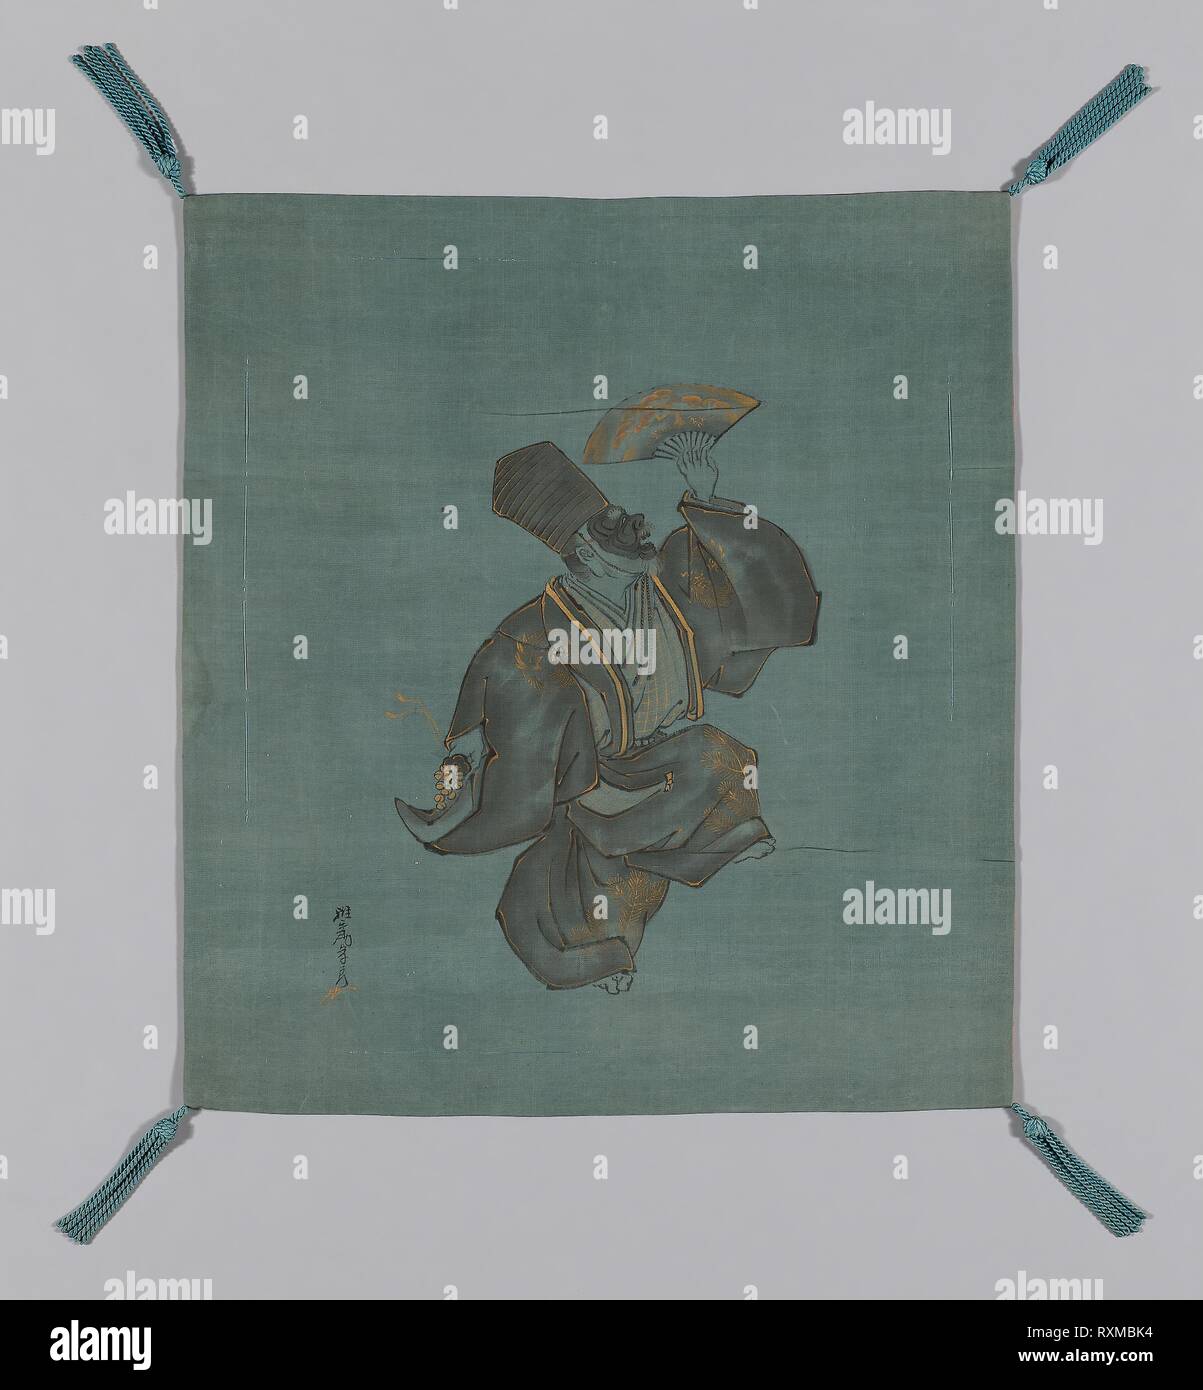 Fukusa (Gift Cover). Painted by Saeki Ganryô (Japanese, active c. 1901/25); Japan. Date: 1801-1825. Dimensions: 61 x 54.8 cm (24 x 21 5/8 in.). Patterned side: silk, warp-faced, weft-ribbed plain weave (shioze); painted with India ink (sumi) and gold paint; lining: silk, wrap-faced, weft-ribbed plain weave (shioze); sewn with front and lining matched in size (Tachikire awrase); silk, running 'controlling' stitches along all edges; corners: silk, knotted and re-piled fringe tassels. Origin: Japan. Museum: The Chicago Art Institute. Stock Photo